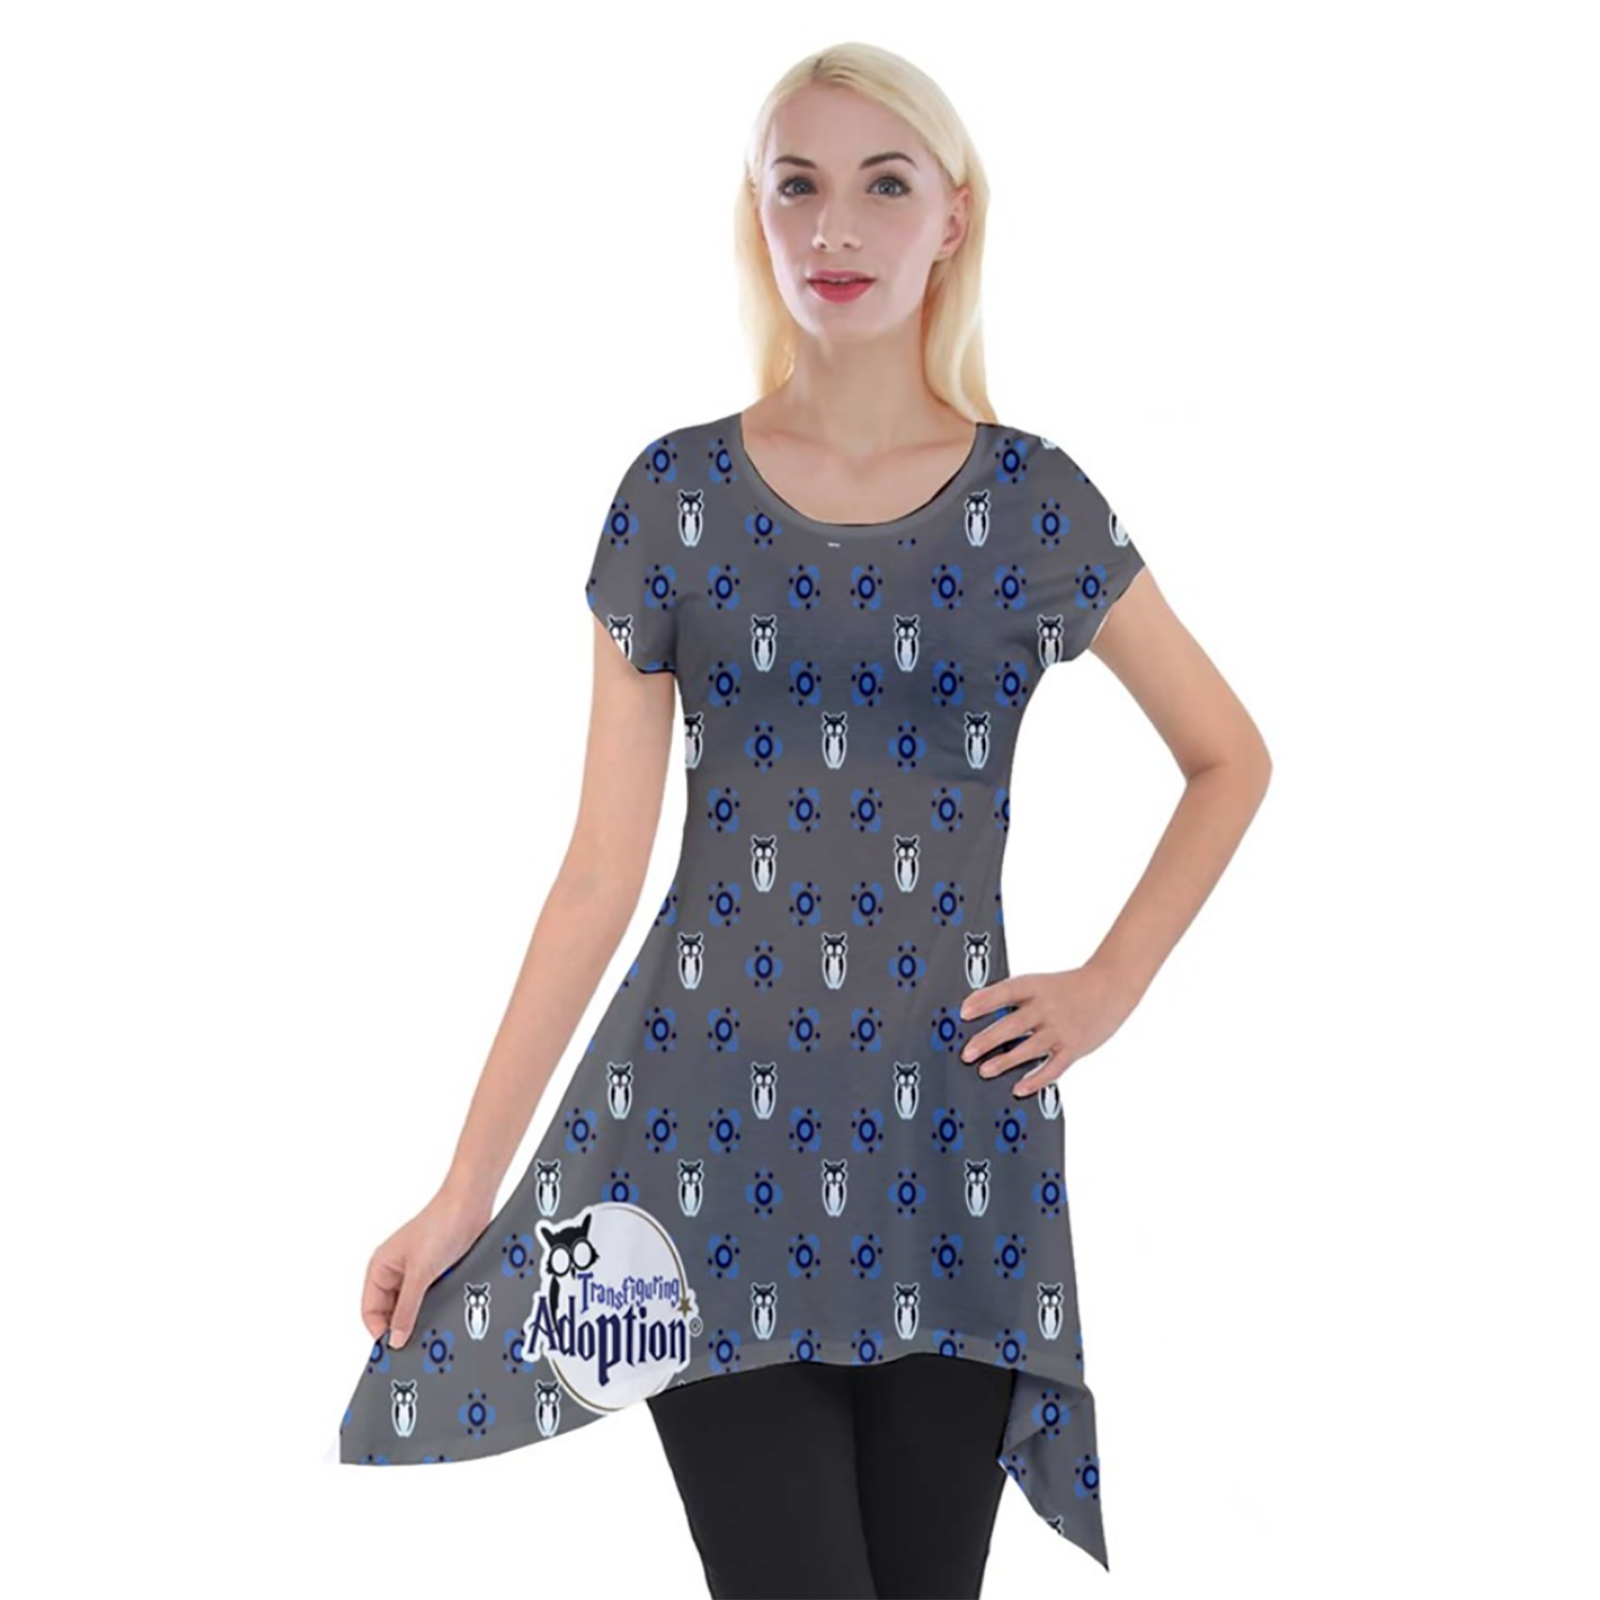 Blue/gray Pattern Women's Short Sleeve Side Drop Tunic - Inspired by Ravenclaw